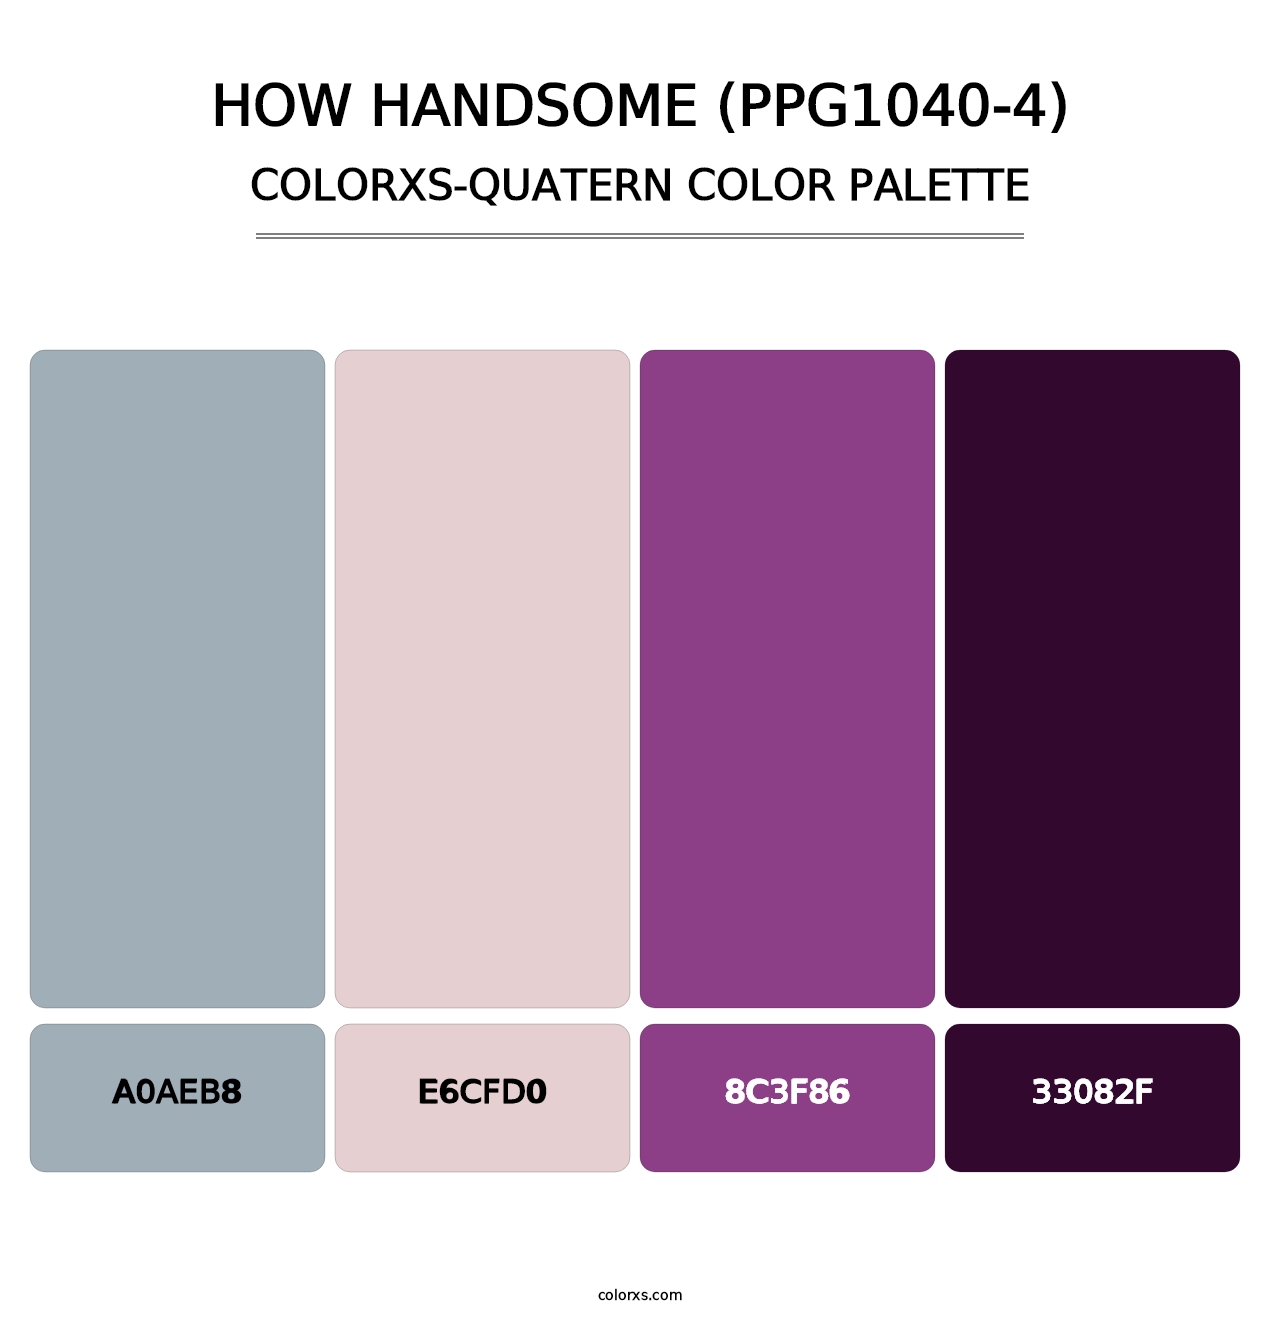 How Handsome (PPG1040-4) - Colorxs Quatern Palette